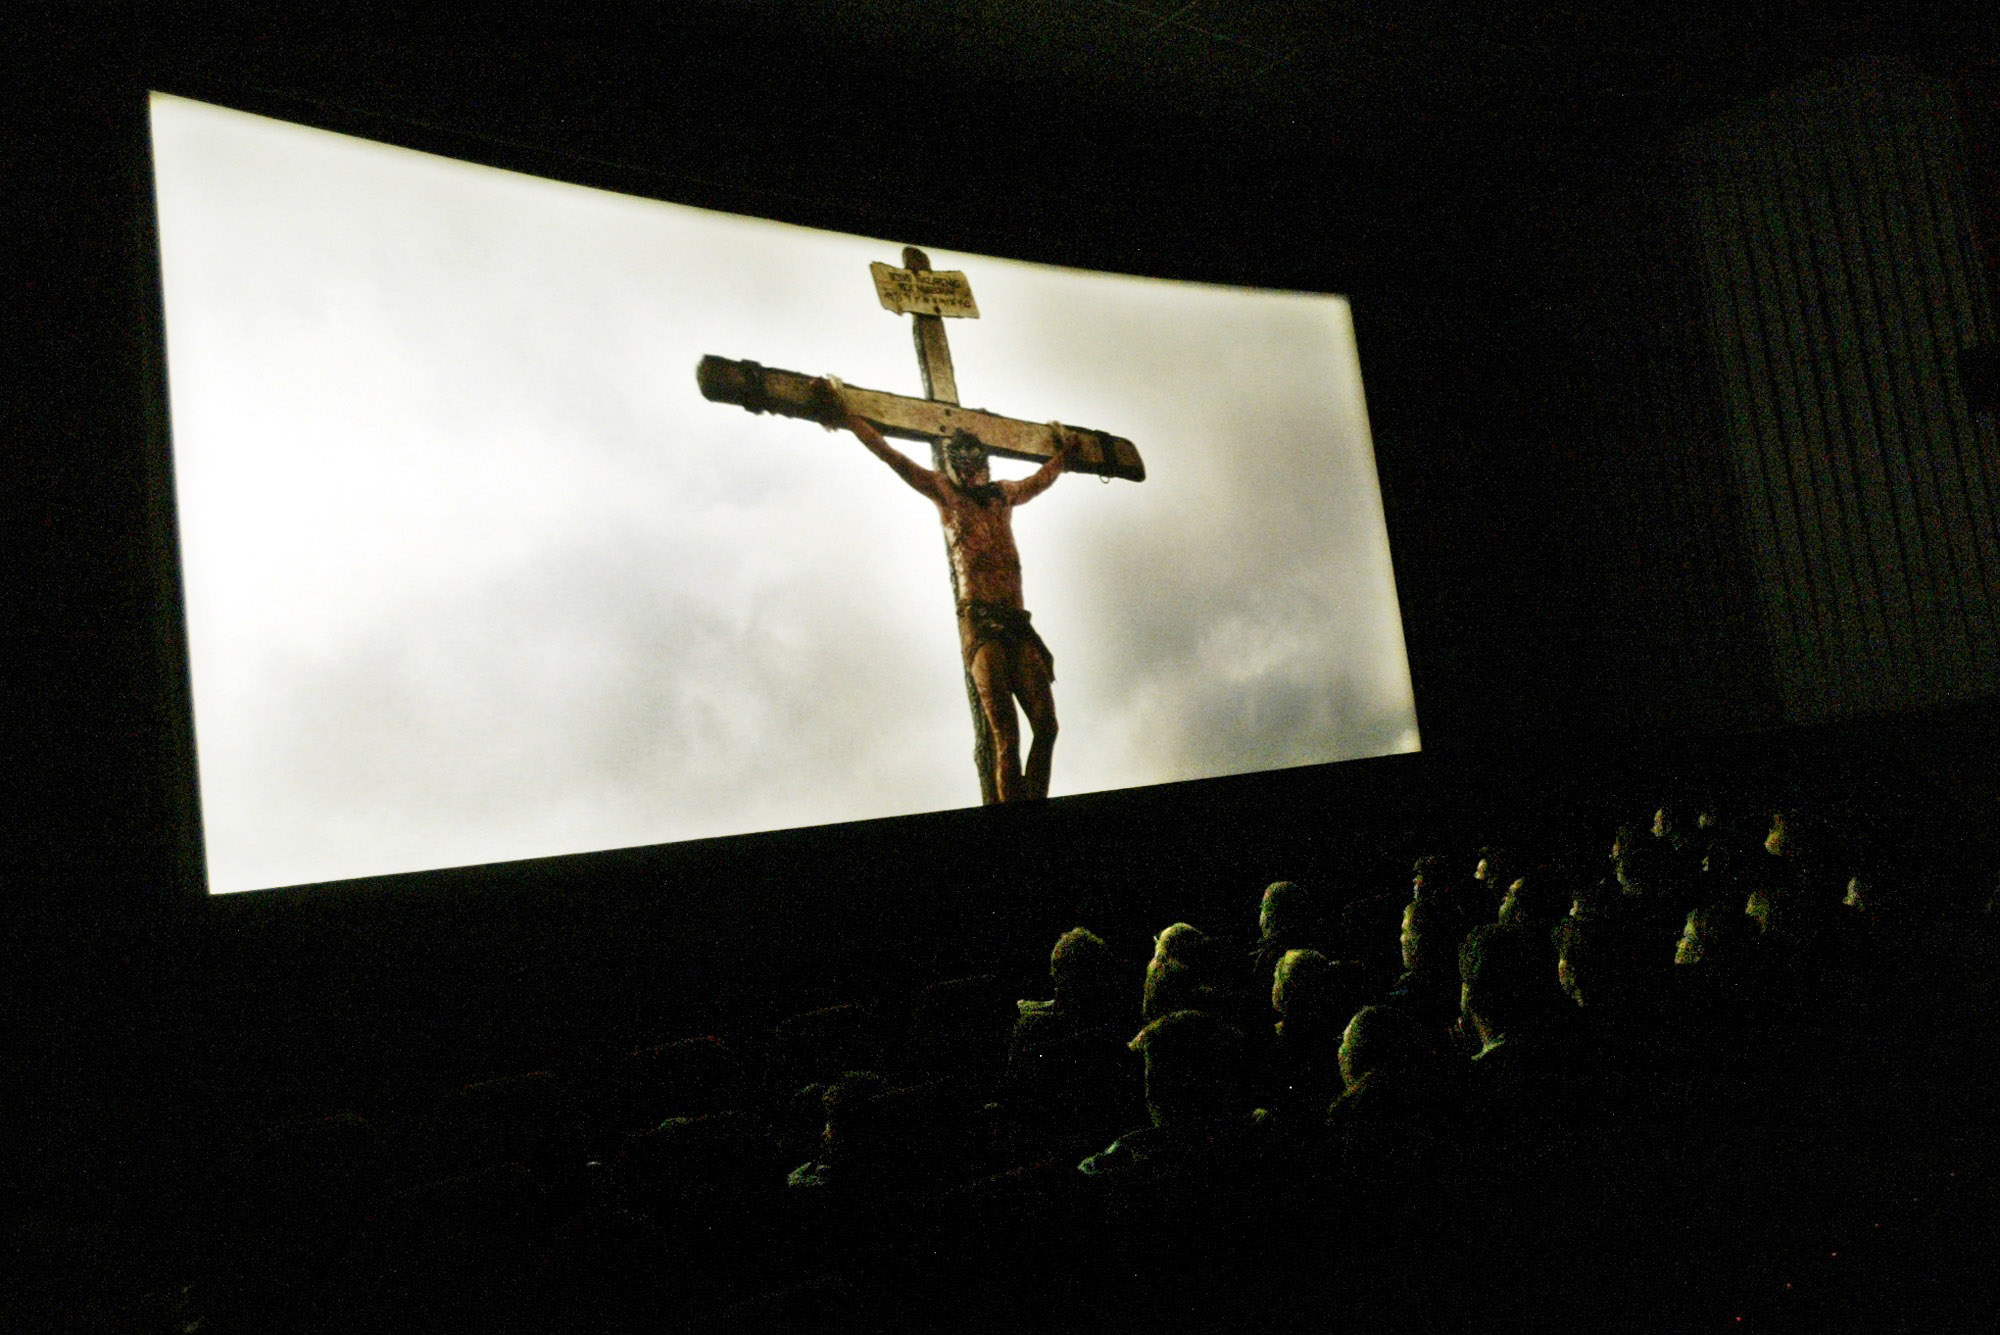 People view Mel Gibson's film "The Passion of the Christ" at Cinema Carousel in Norton Shores, Mich., in 2004. (Cory Morse—The Muskegon Chronicle/AP)